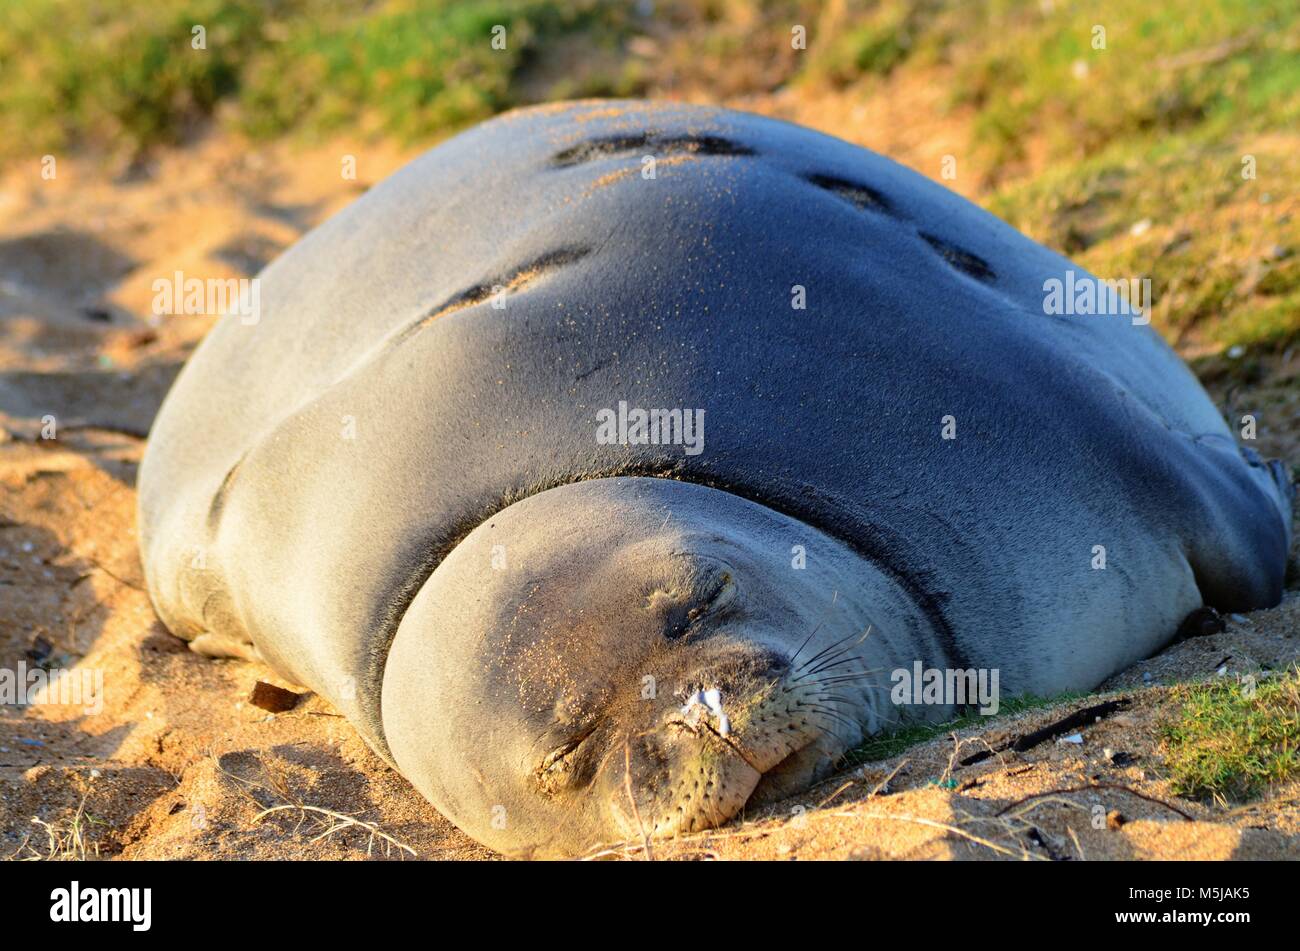 A monk seal has come inland from the ocean, to lay on the sandy Hawaiian beach and rest before heading back out to sea to hunt Stock Photo